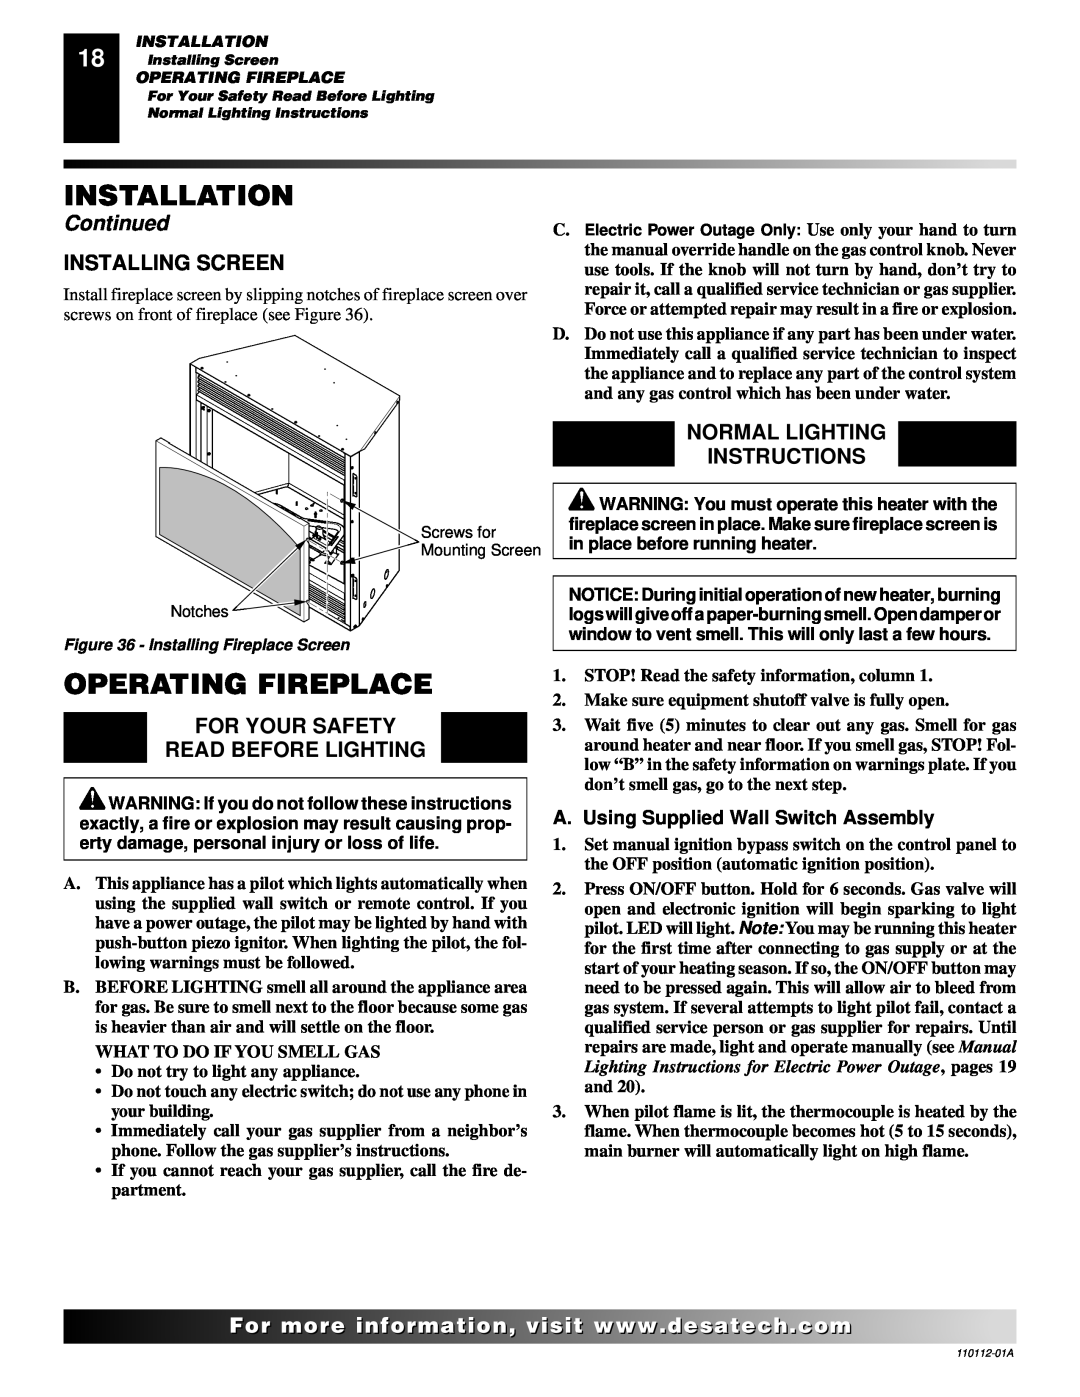 Desa VTGF33NRA Operating Fireplace, Installing Screen, For Your Safety Read Before Lighting, Normal Lighting Instructions 